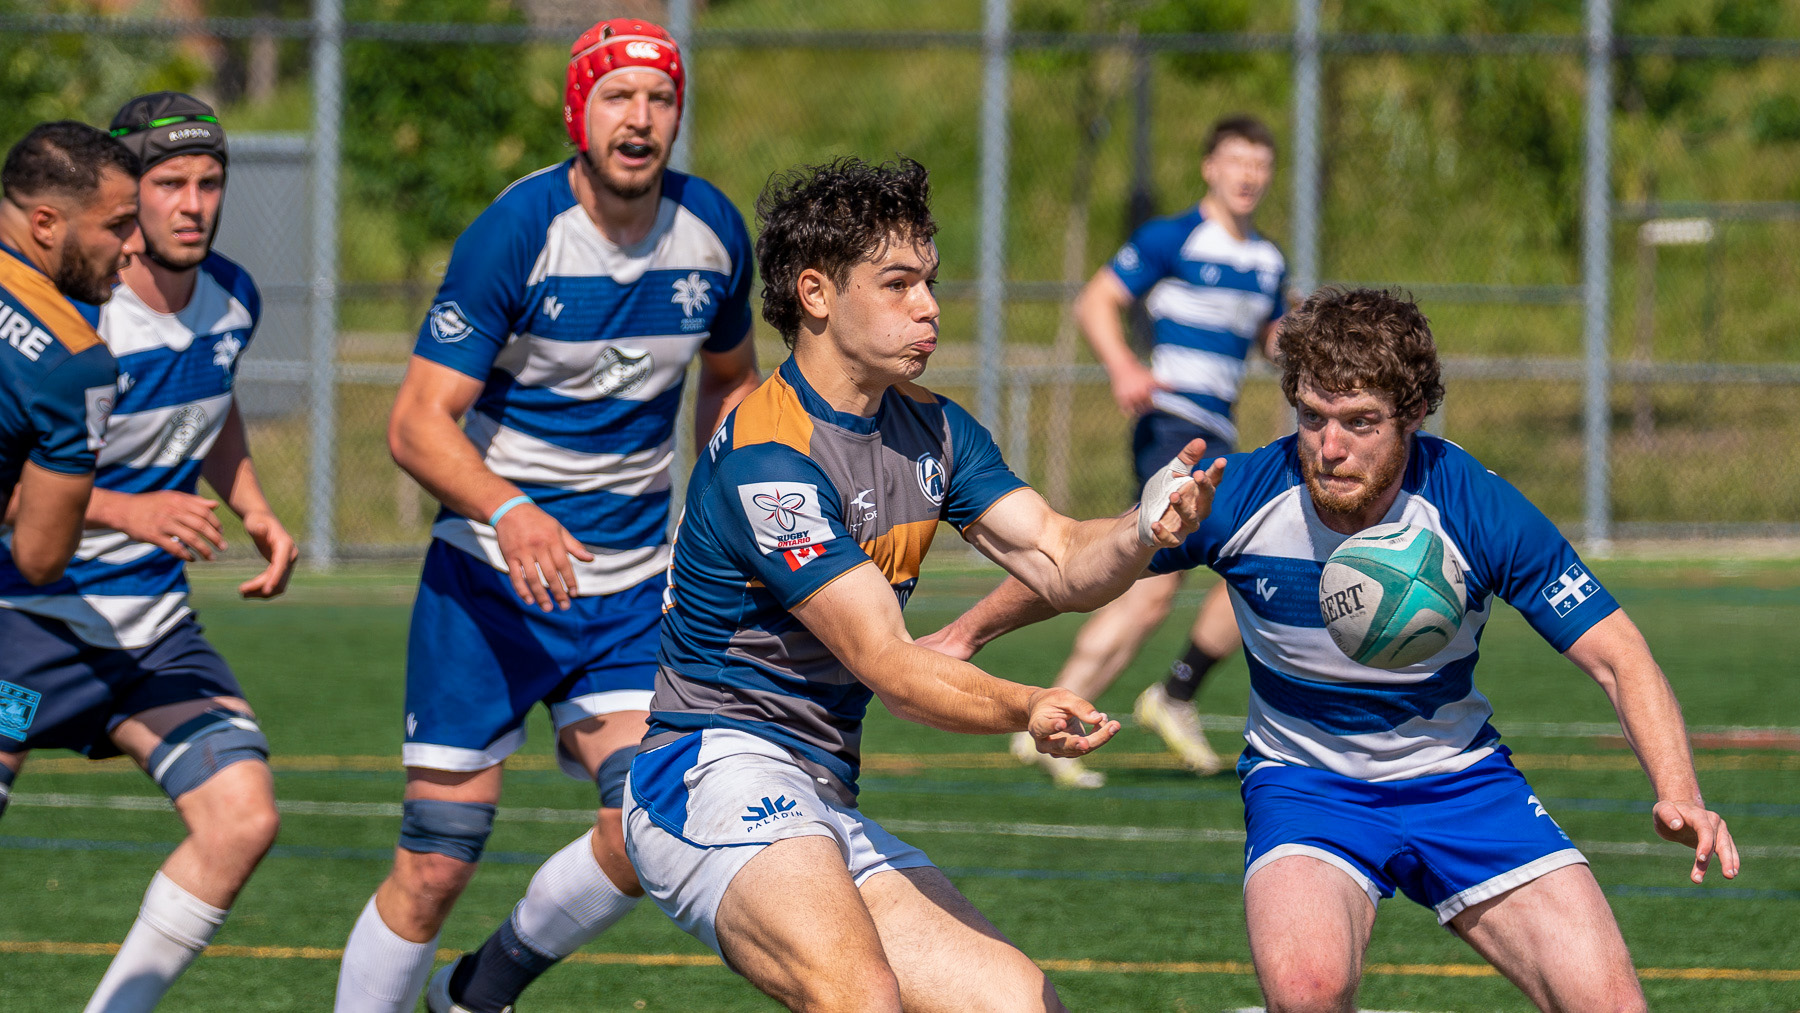 Academy Set for Winner-Take-All Clash with Selects in Coast to Coast Cup